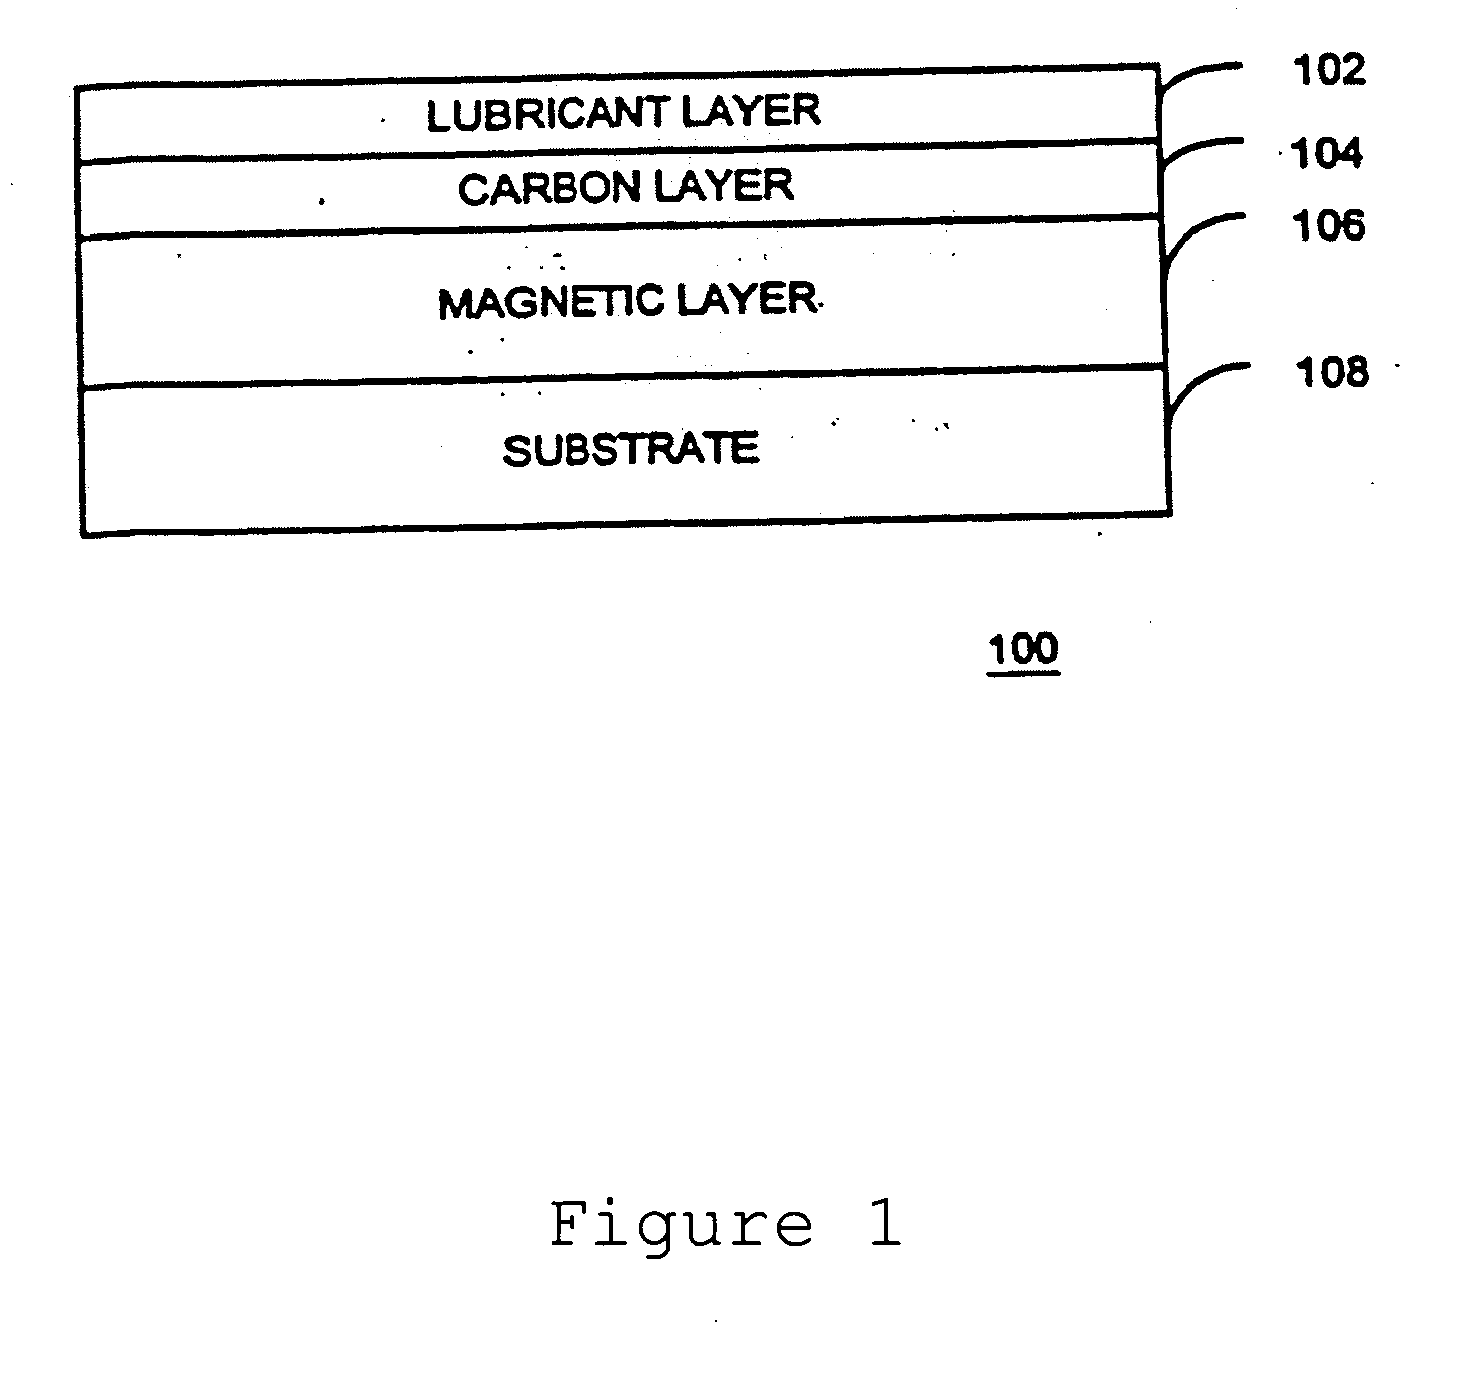 Method of detecting and classifying scratches, particles and pits on thin film disks or wafers